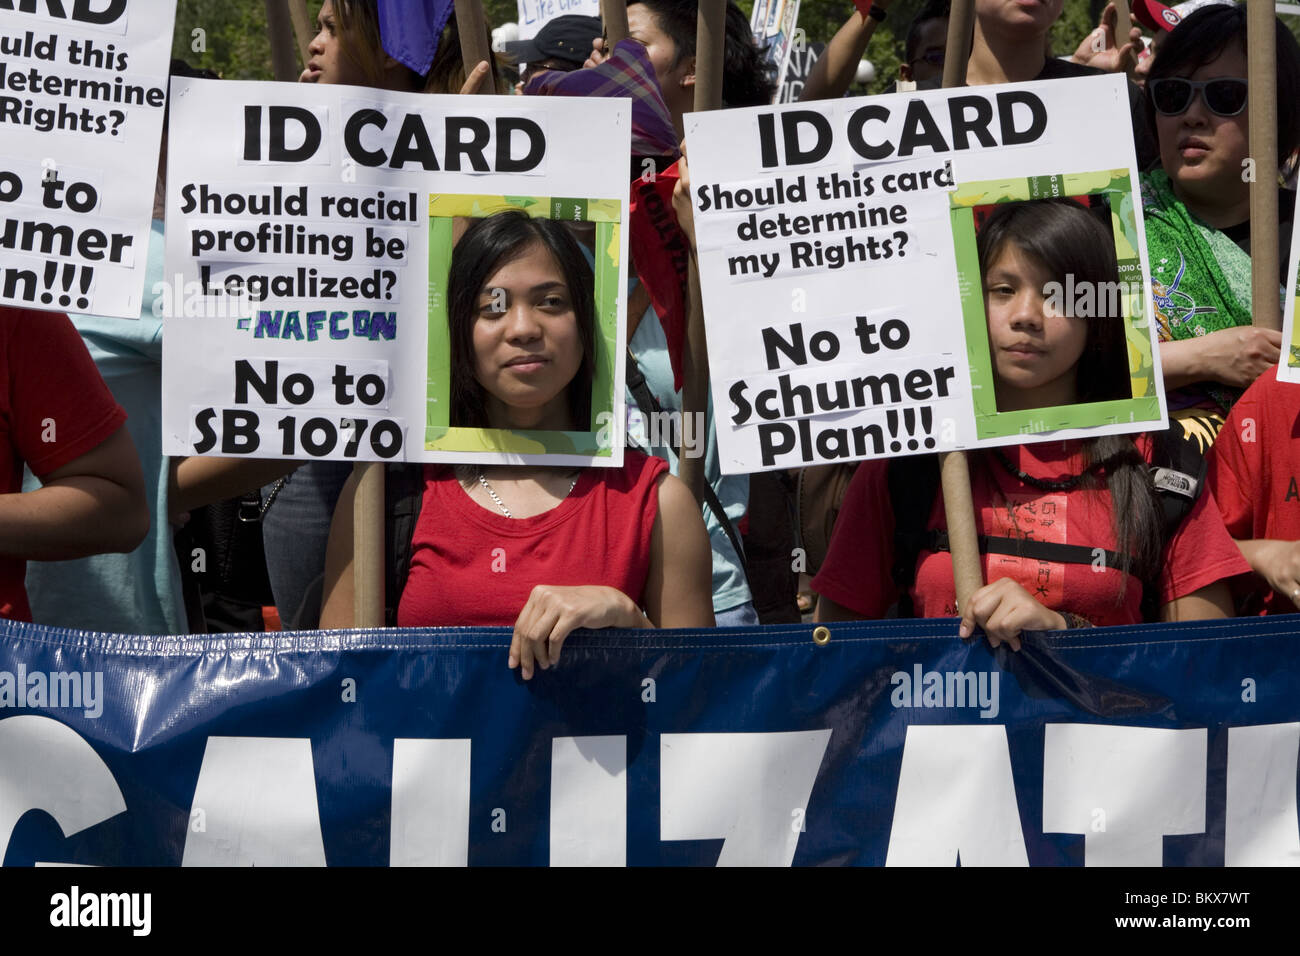 May 1, 2010: May Day rally and march for immigrant and workers rights at Union Square, New York City. Stock Photo